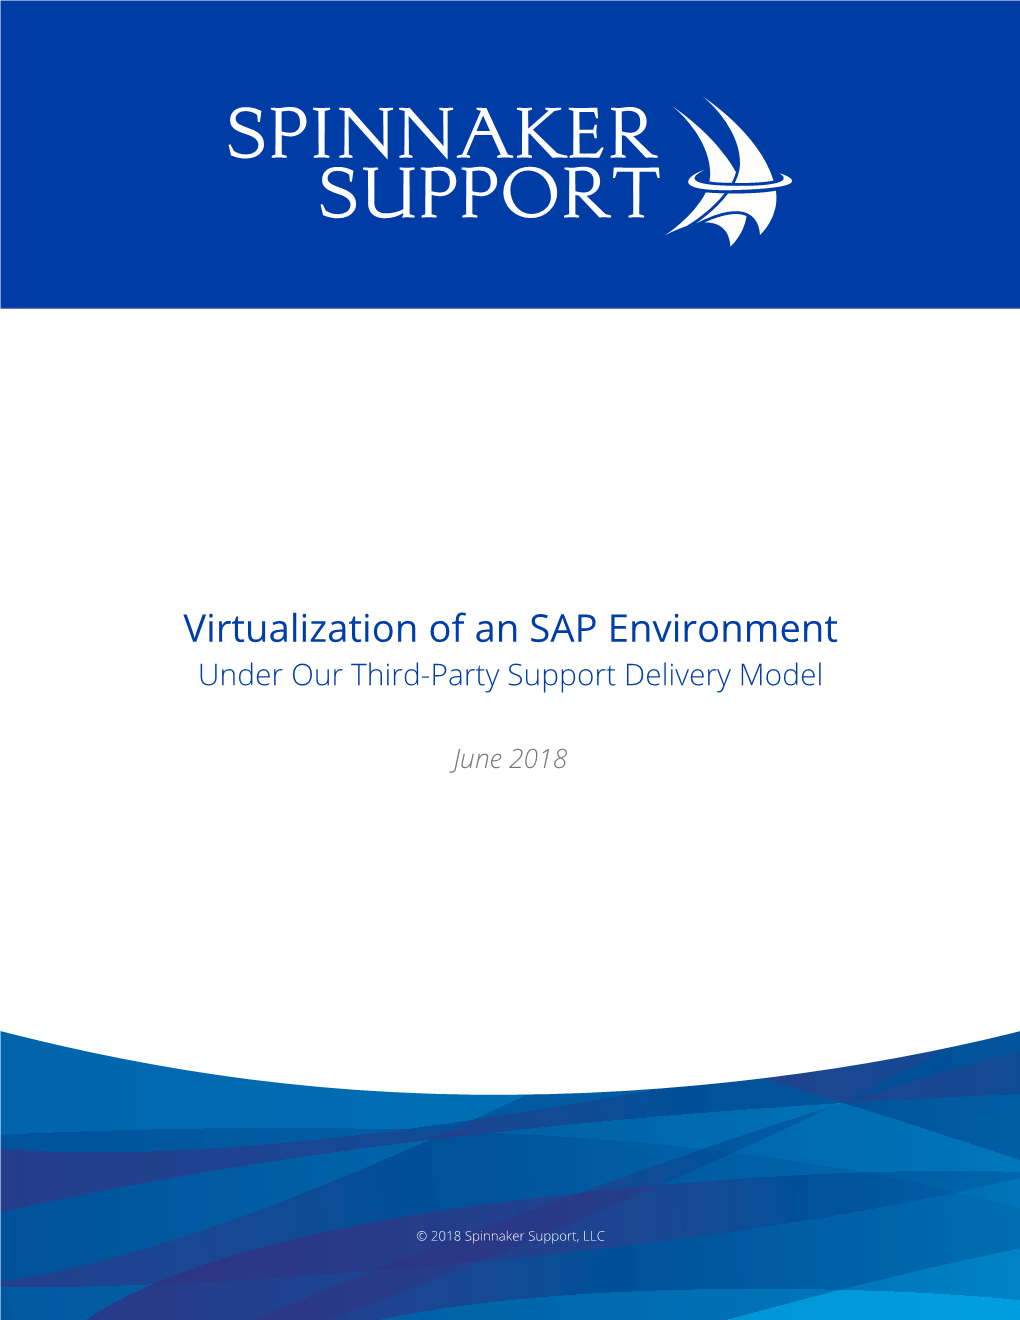 Virtualization of an SAP Environment Under Our Third-Party Support Delivery Model